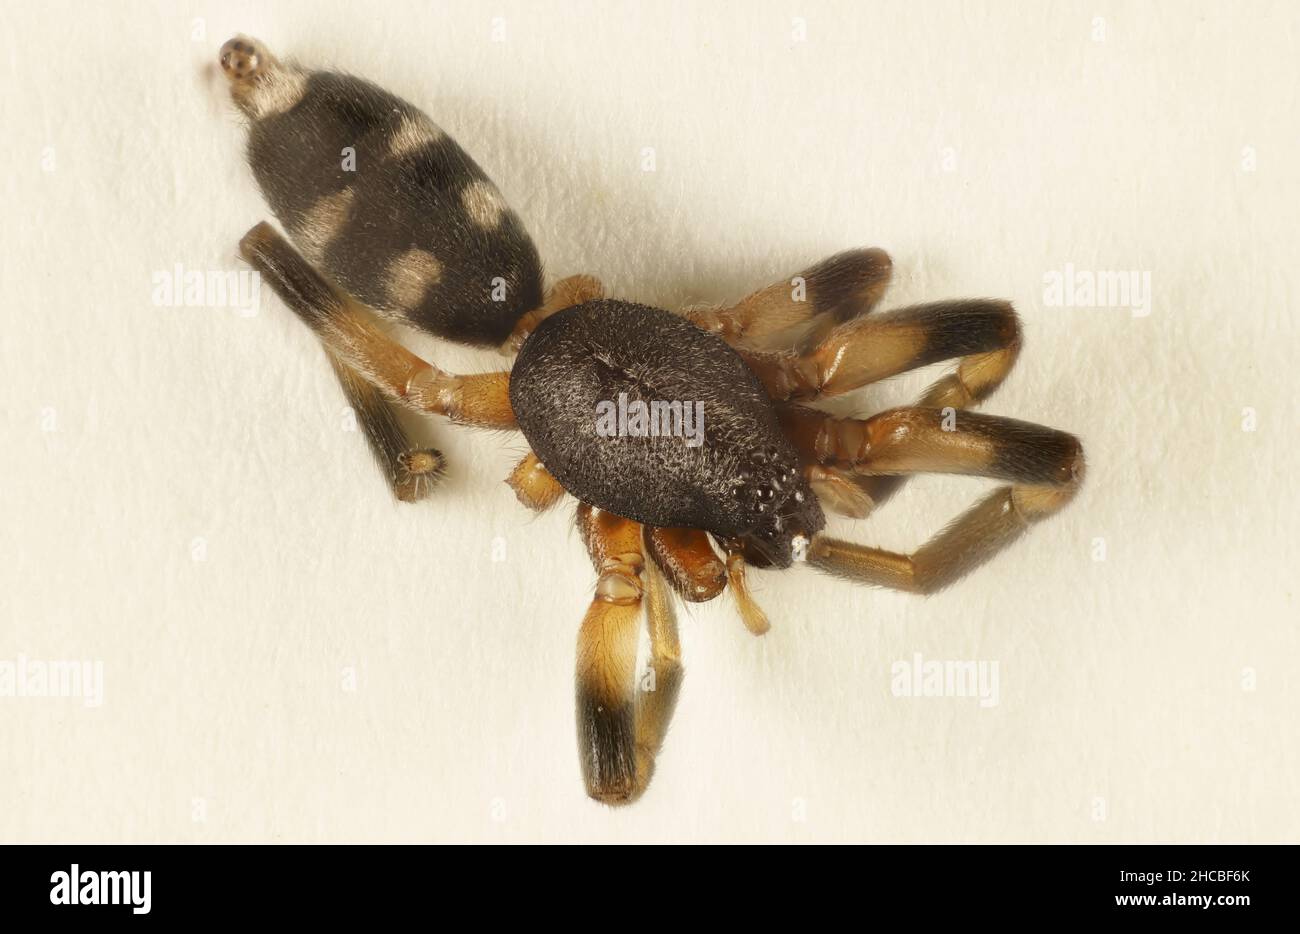 Super-macro dorsal view of White-tailed Spider (Lampona) inside house, South Australia Stock Photo